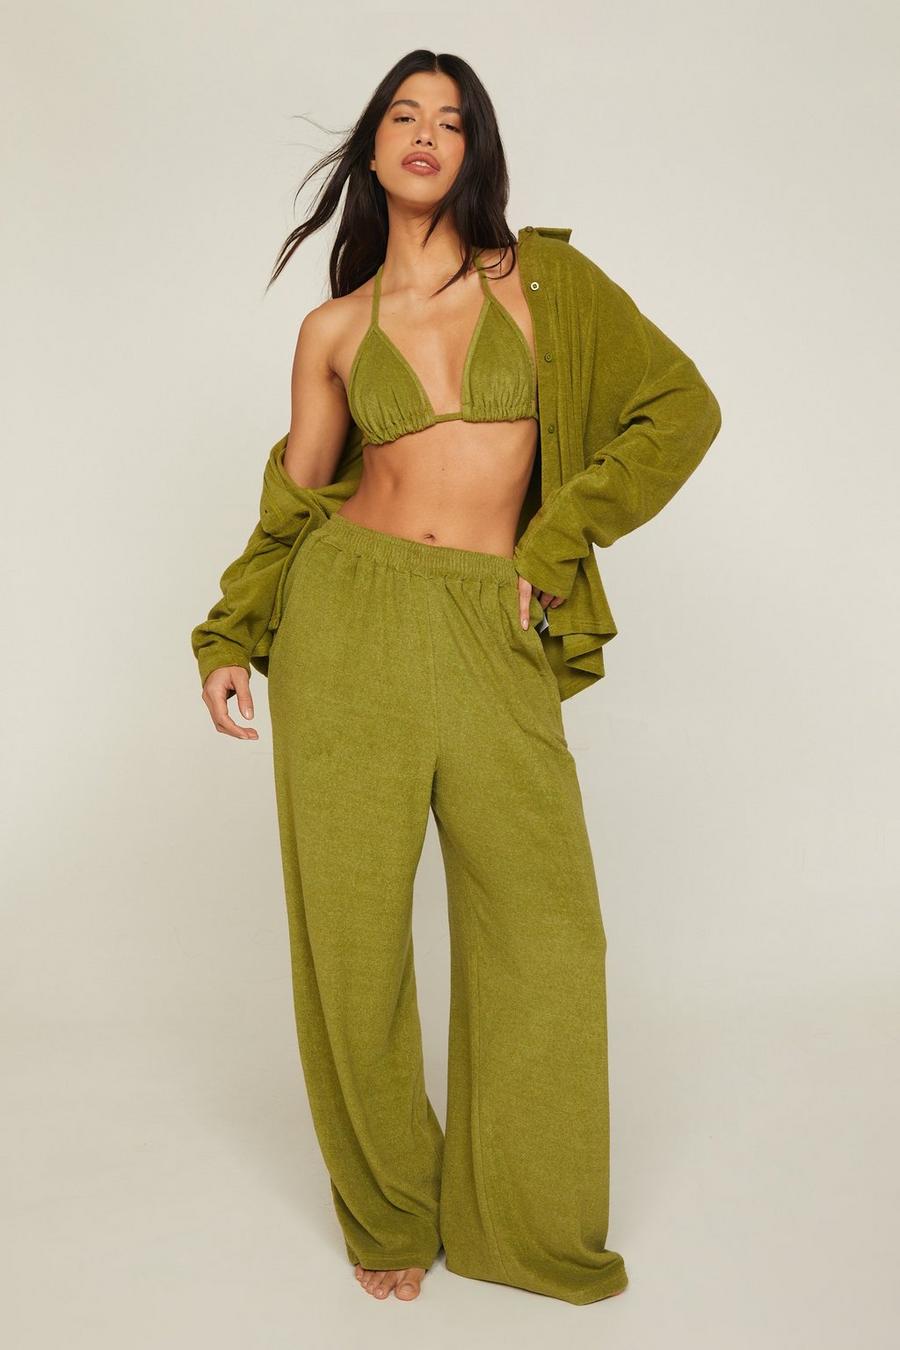 Olive Toweling Shirt 3 Piece Cover Up Set